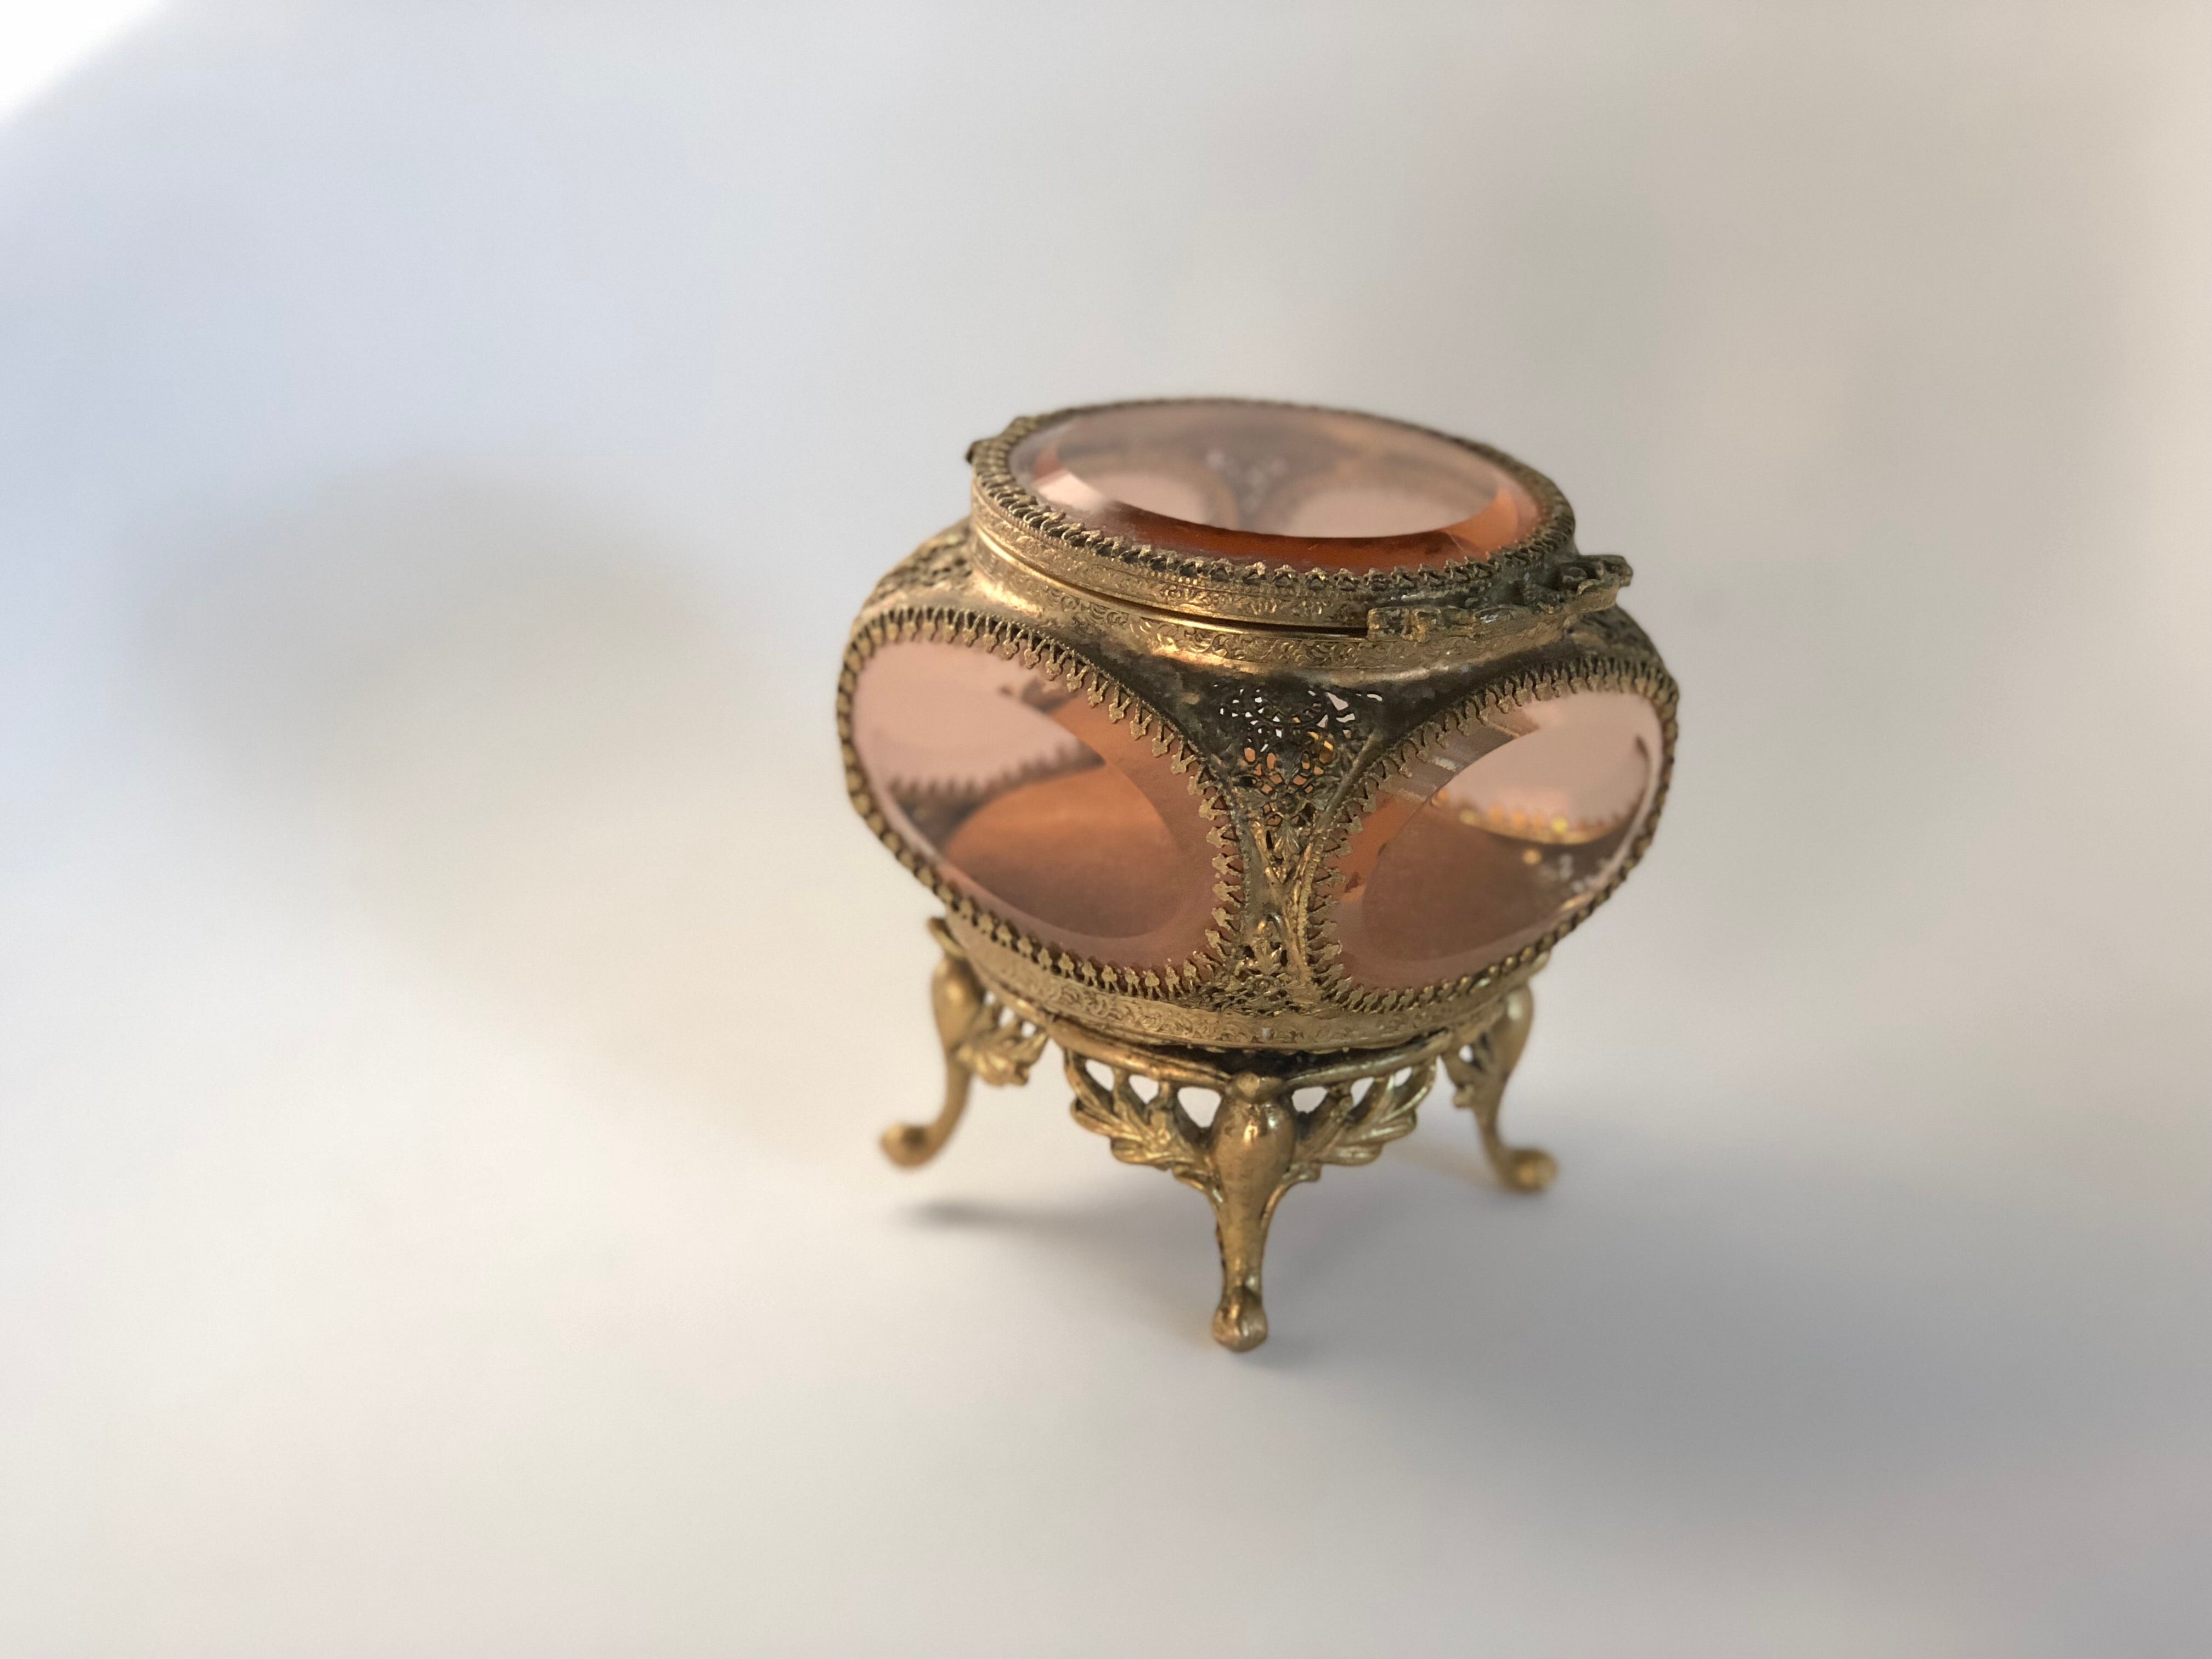 Rare Amber Tinted French Victorian Jewelry Box